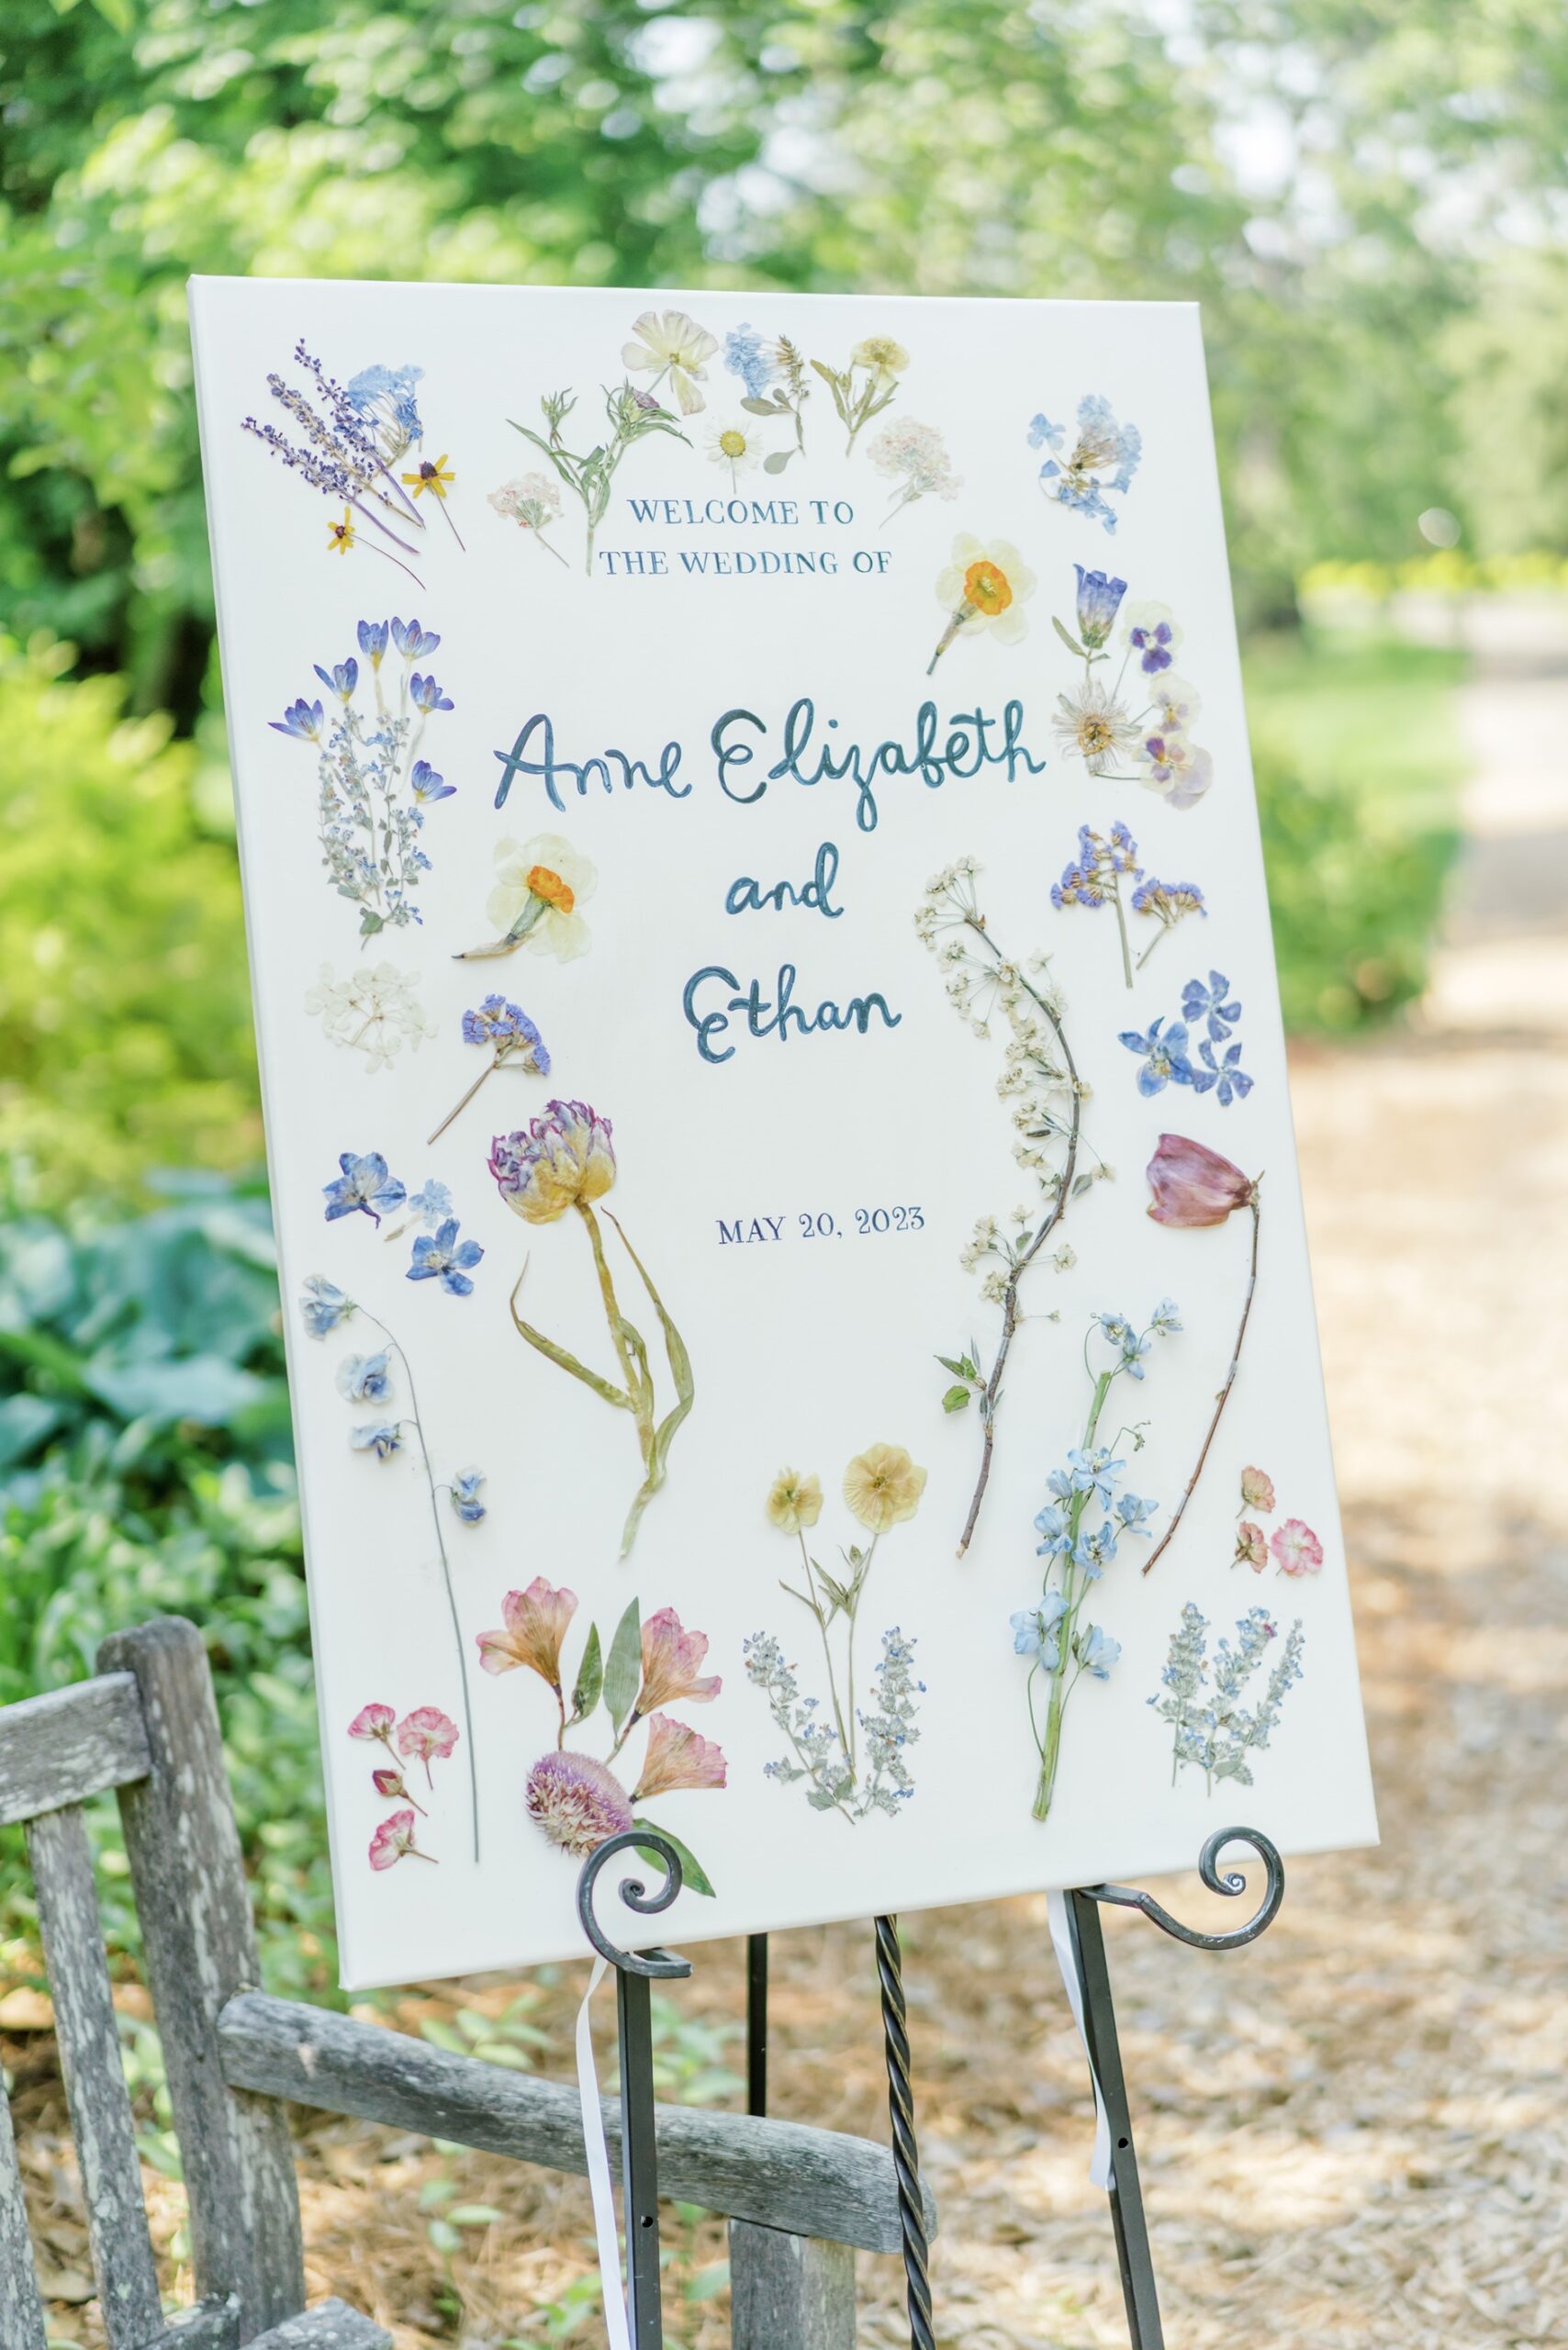 Colorful Yew Dell Gardens wedding welcome sign